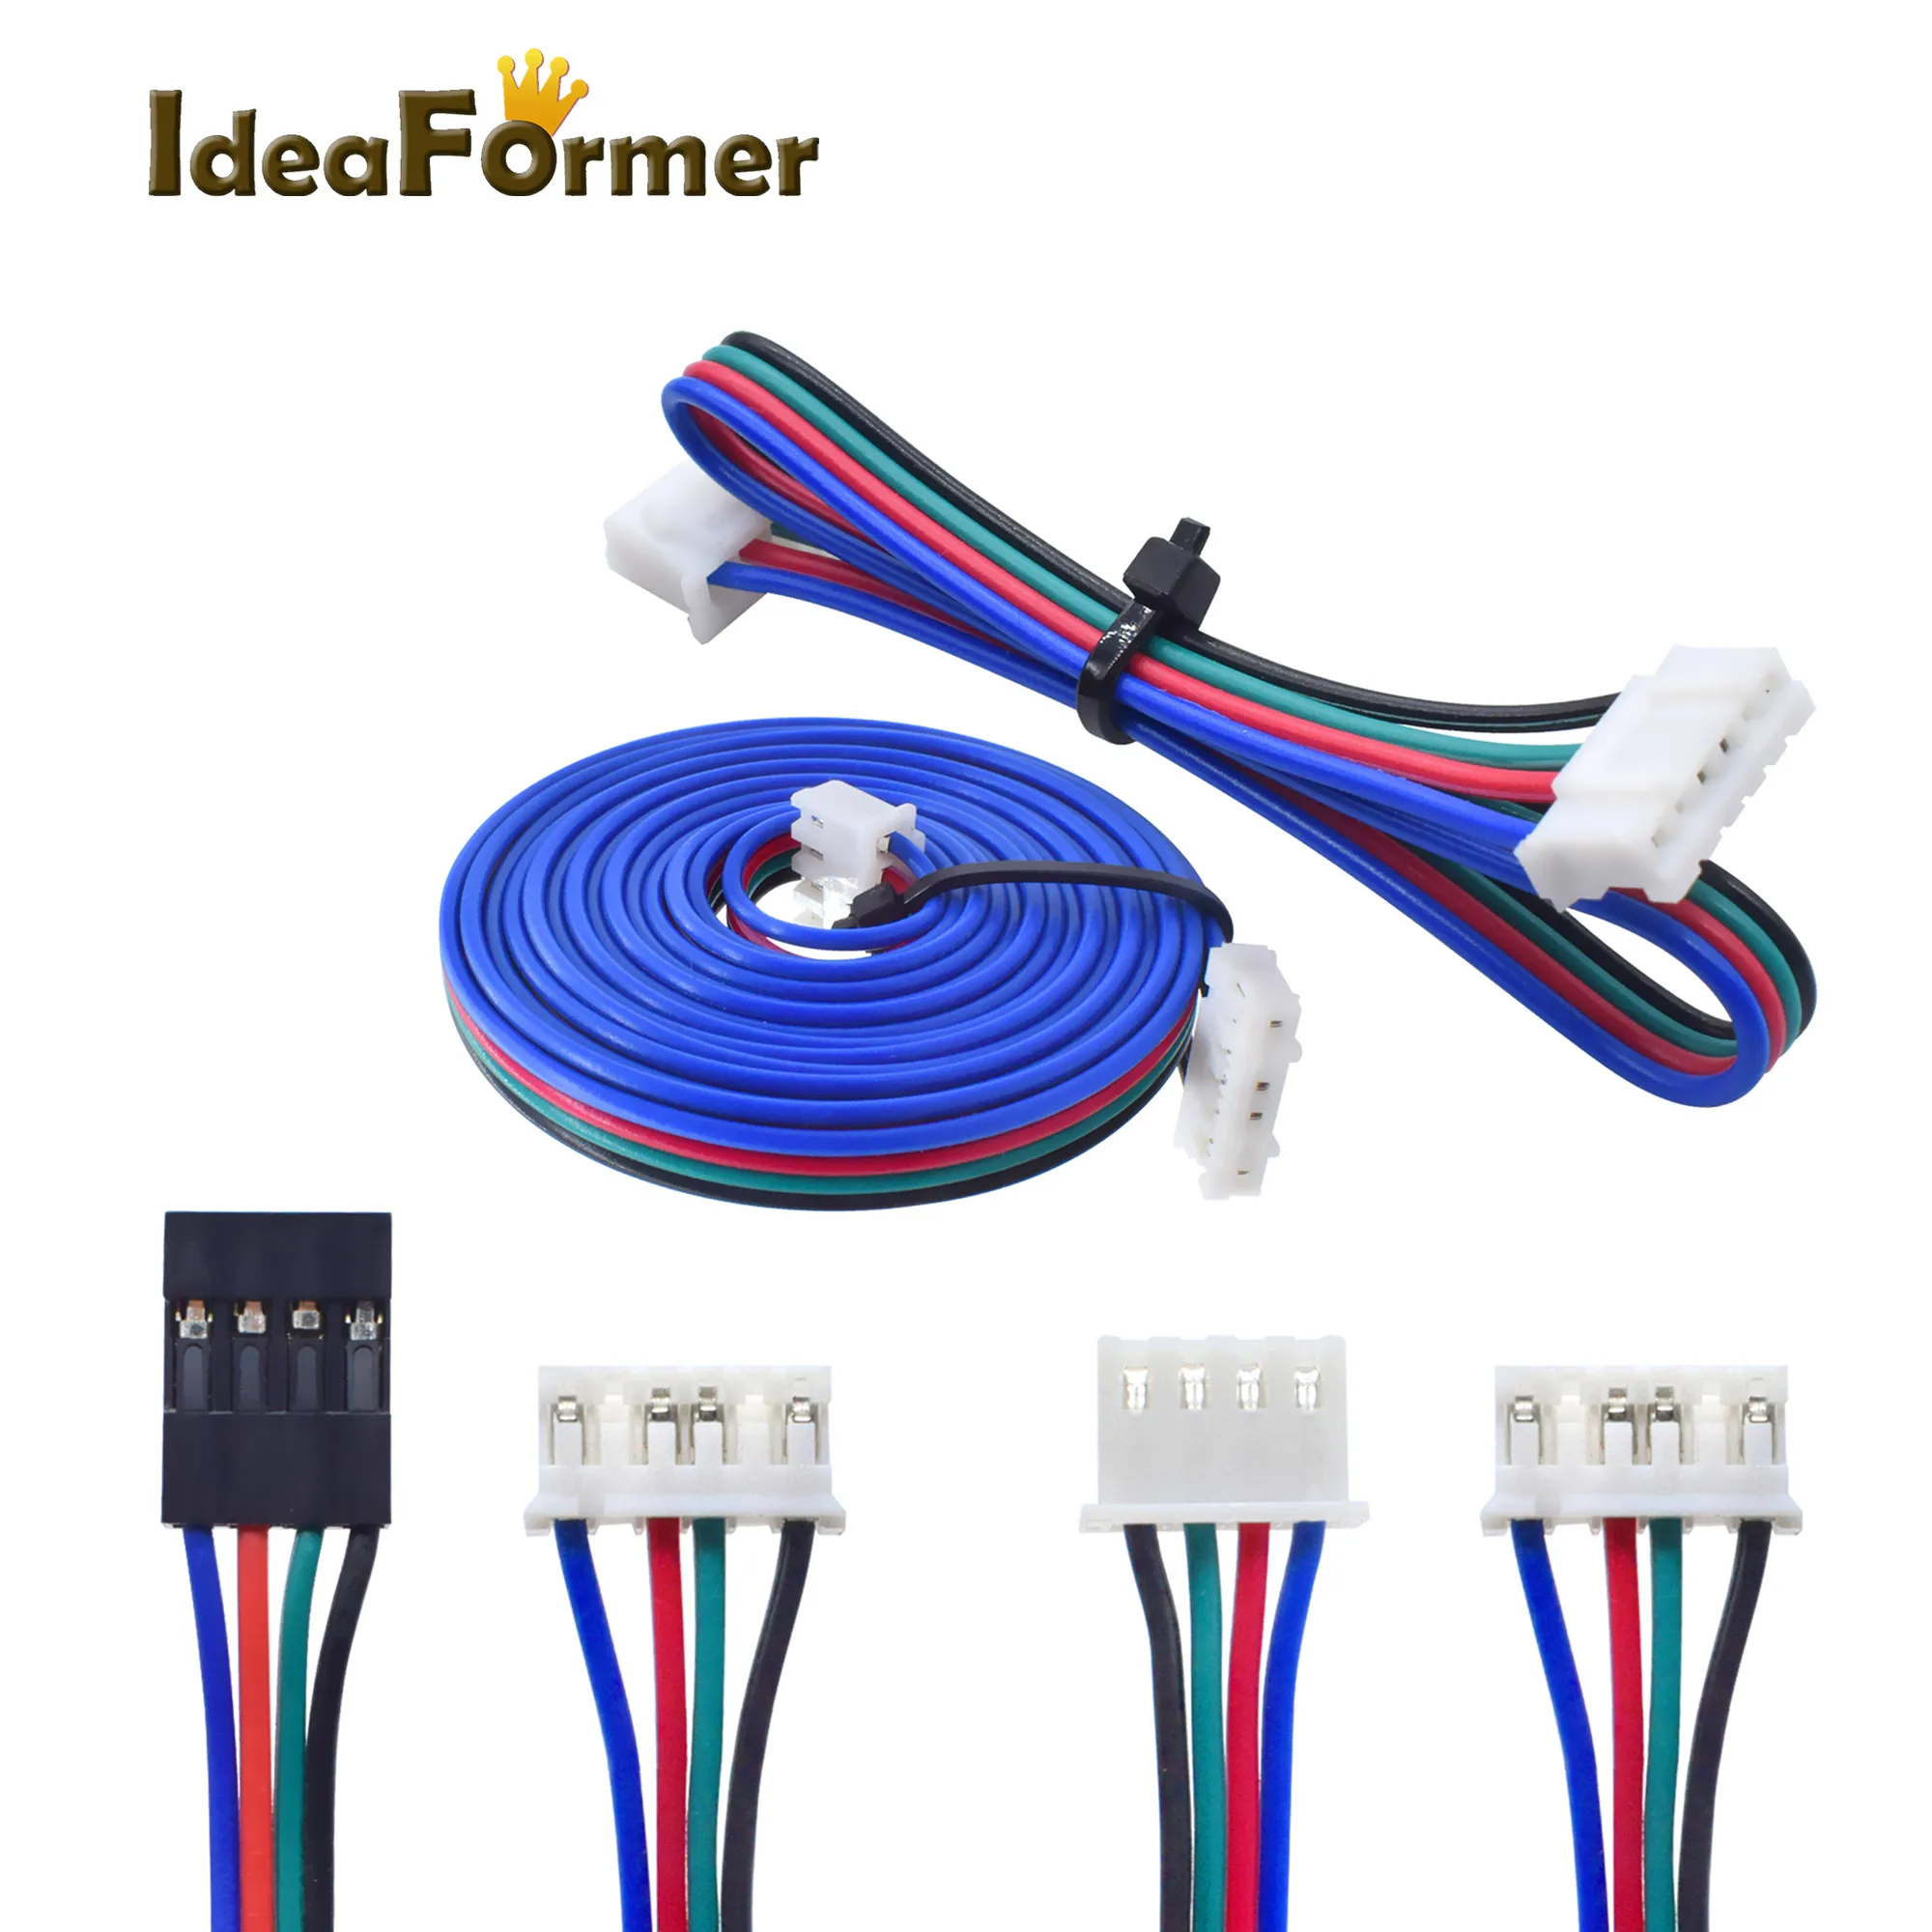 1Pcs 10cm/50cm/100cm/150mm Stepper Motor Cables 6pin PH2.0-4pin Extension Cord XH2.54 Black DuPont terminal for 3D Printer parts 1m 2m motor connector cables xh2 54 4pin to xh2 0 6pin terminal paralled motor wires for 3d printer stepper motor